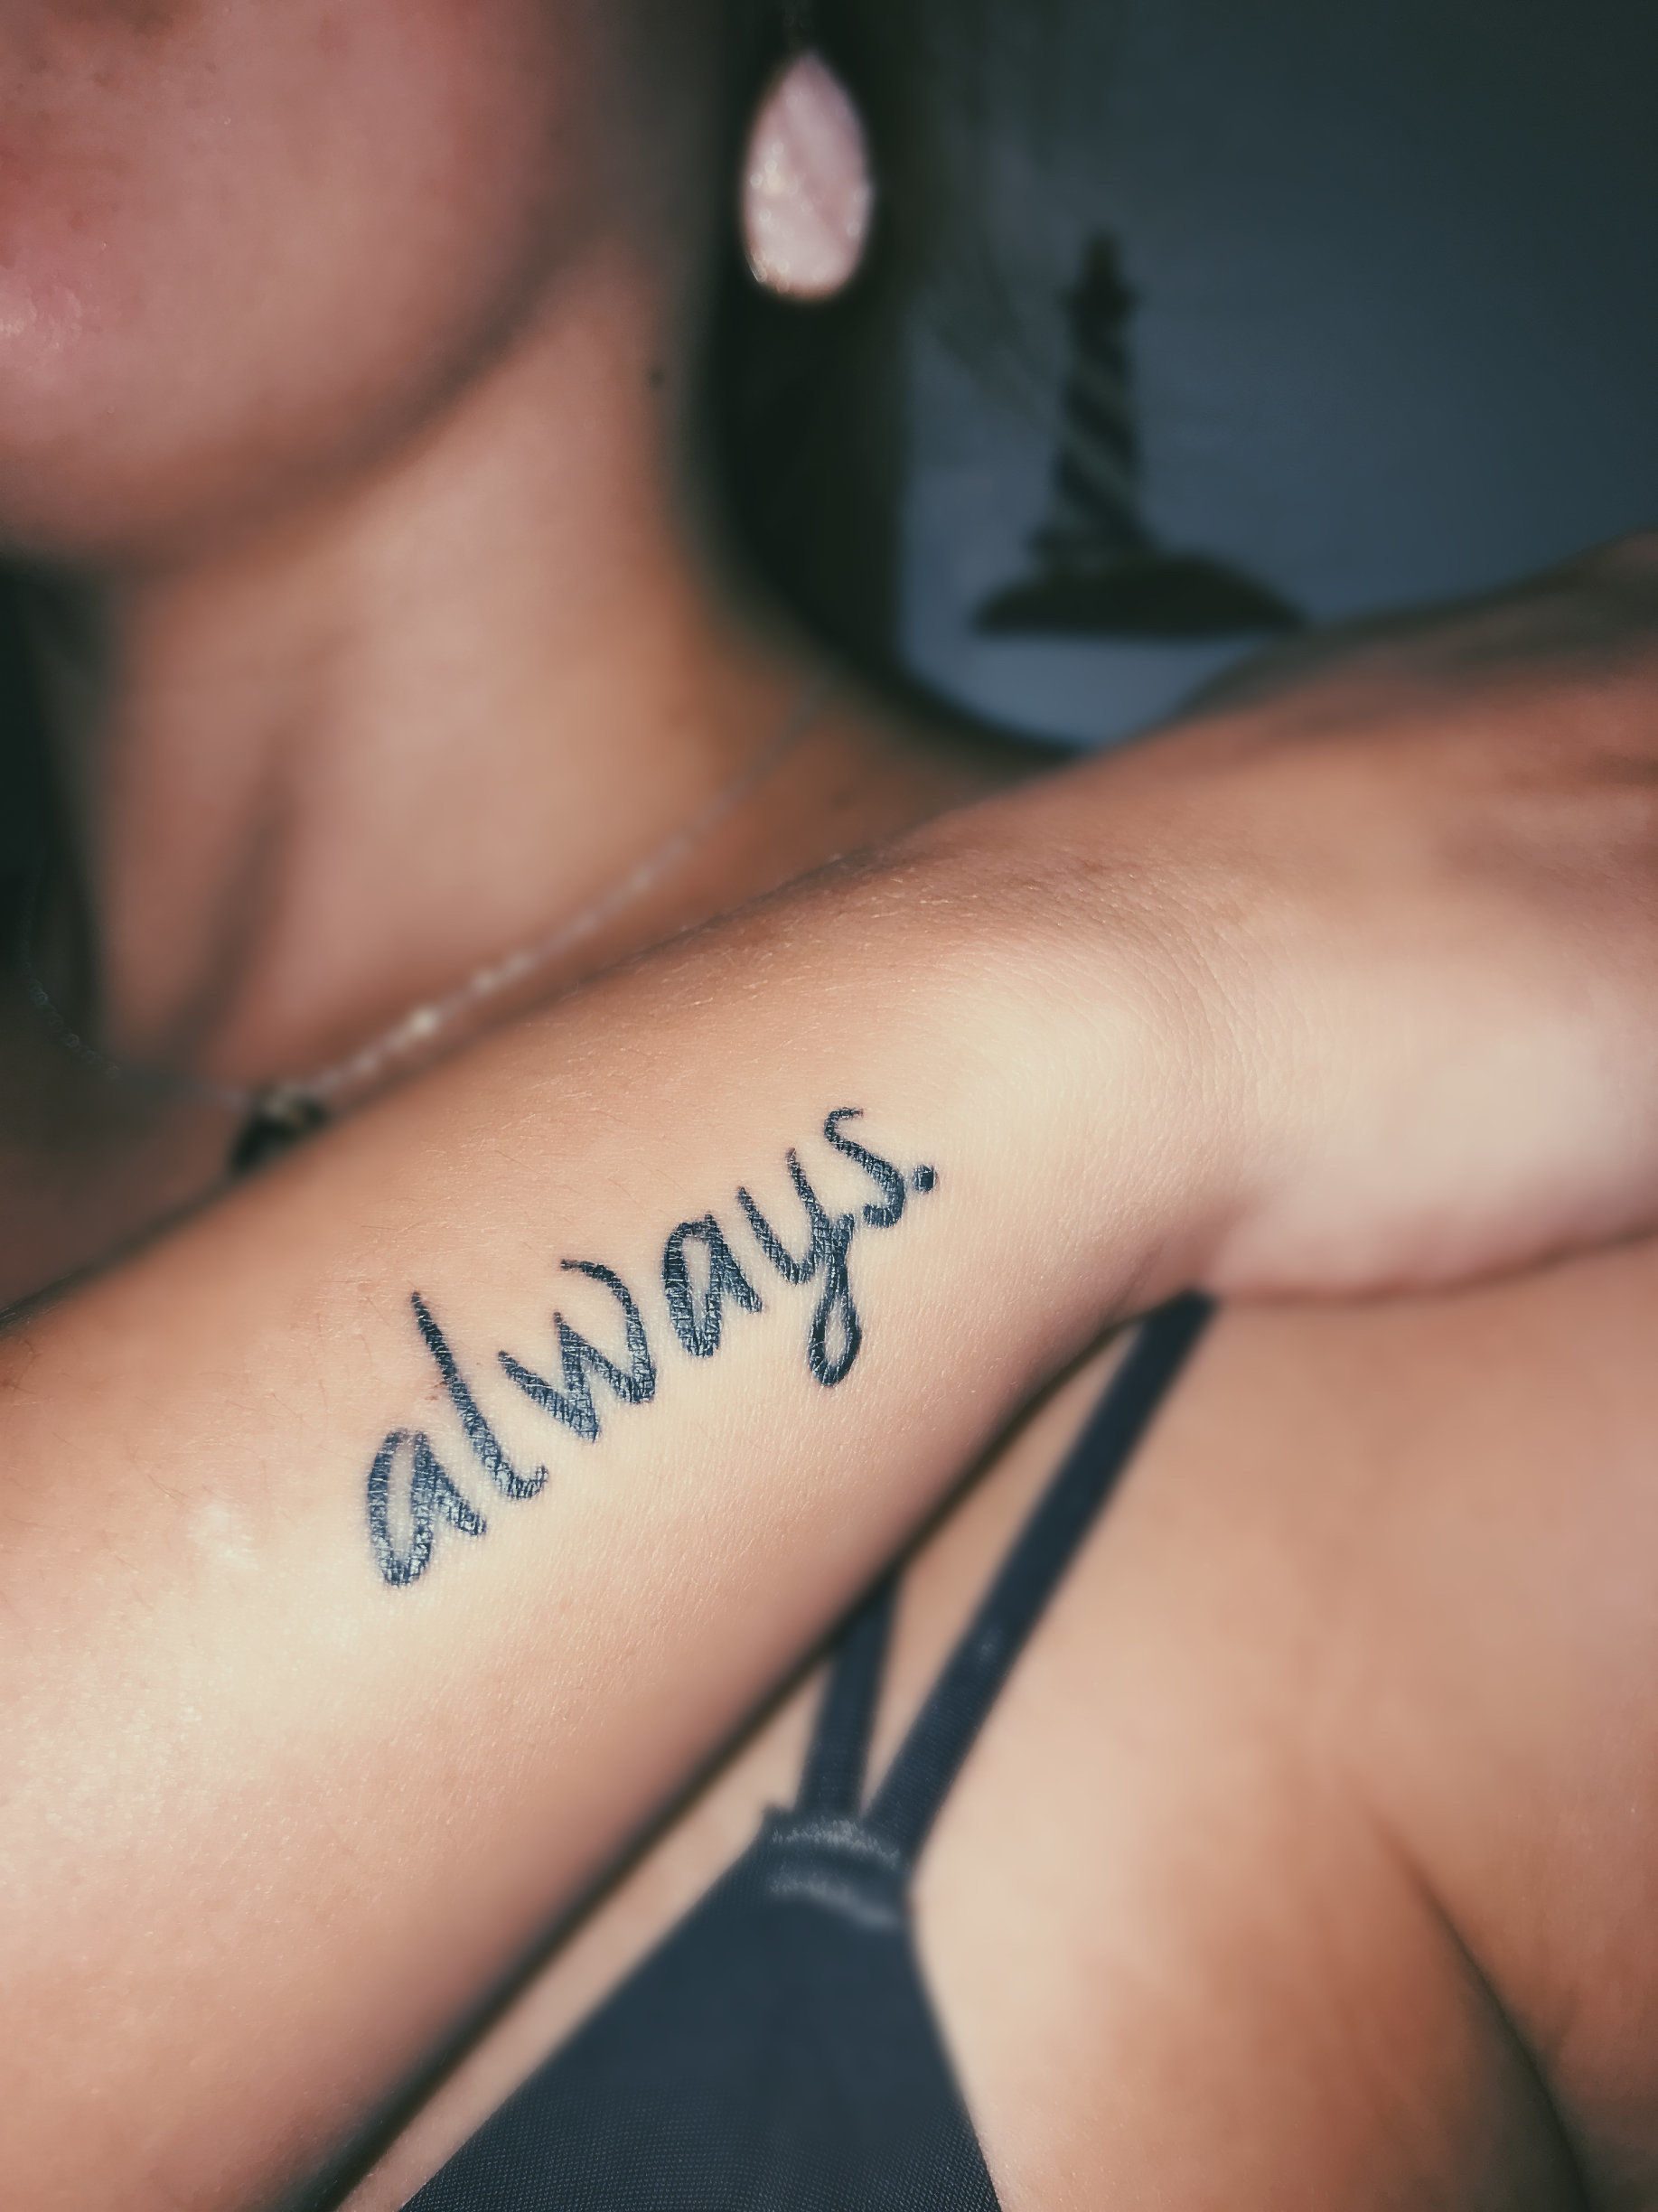 27 Magically Meaningful Tattoos Inspired By The World Of Harry Potter